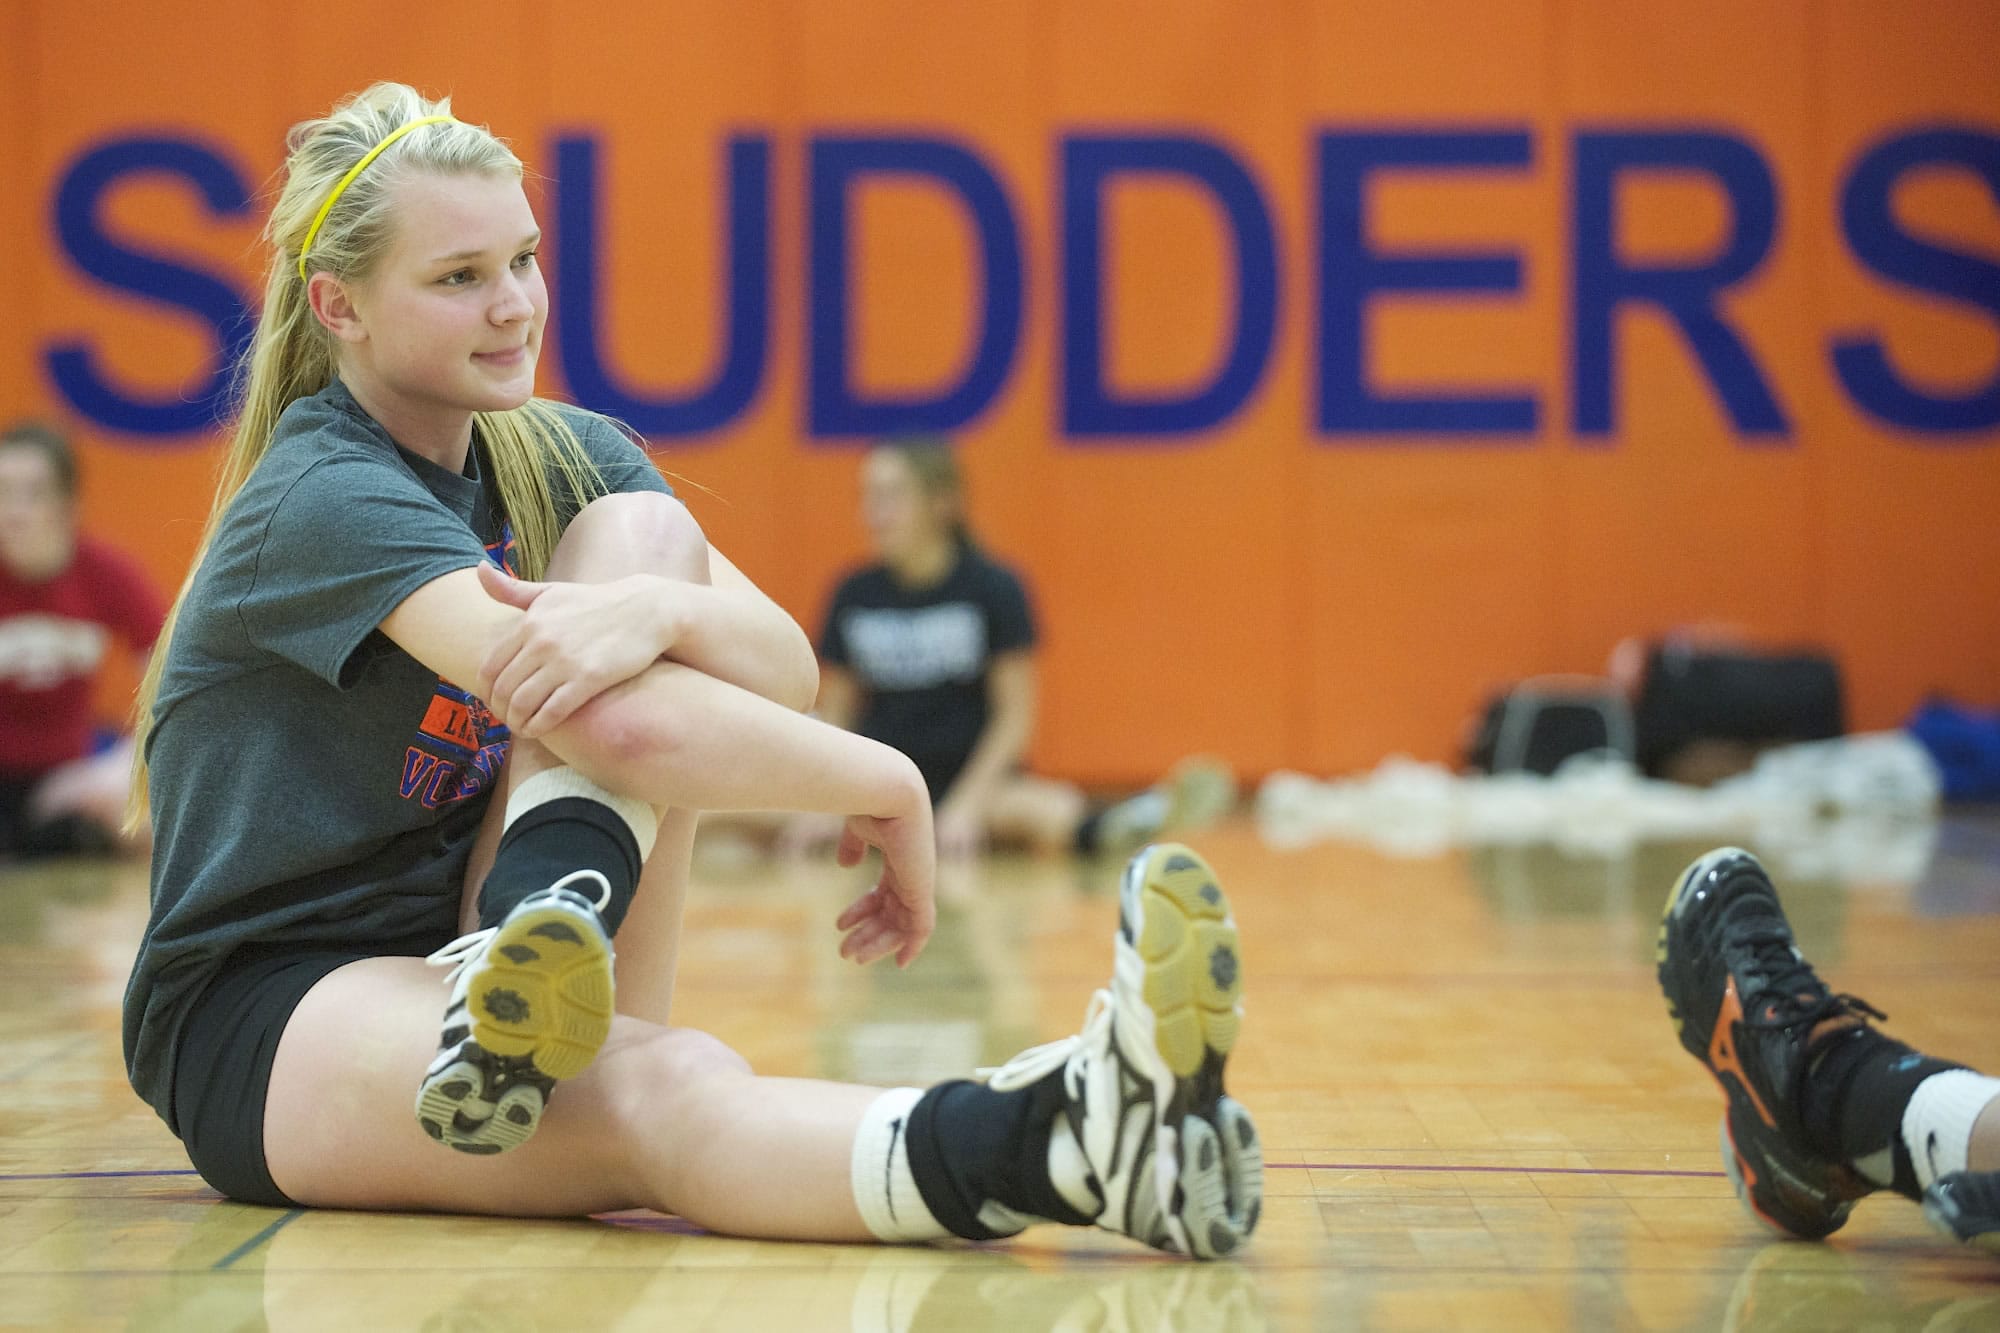 Shannon Boyle of Ridgefield High School stretches before the start of volleyball practice Monday October 14, 2013 in Ridgefield, Washington. Boyle, is a three-sport athlete at Ridgefield.